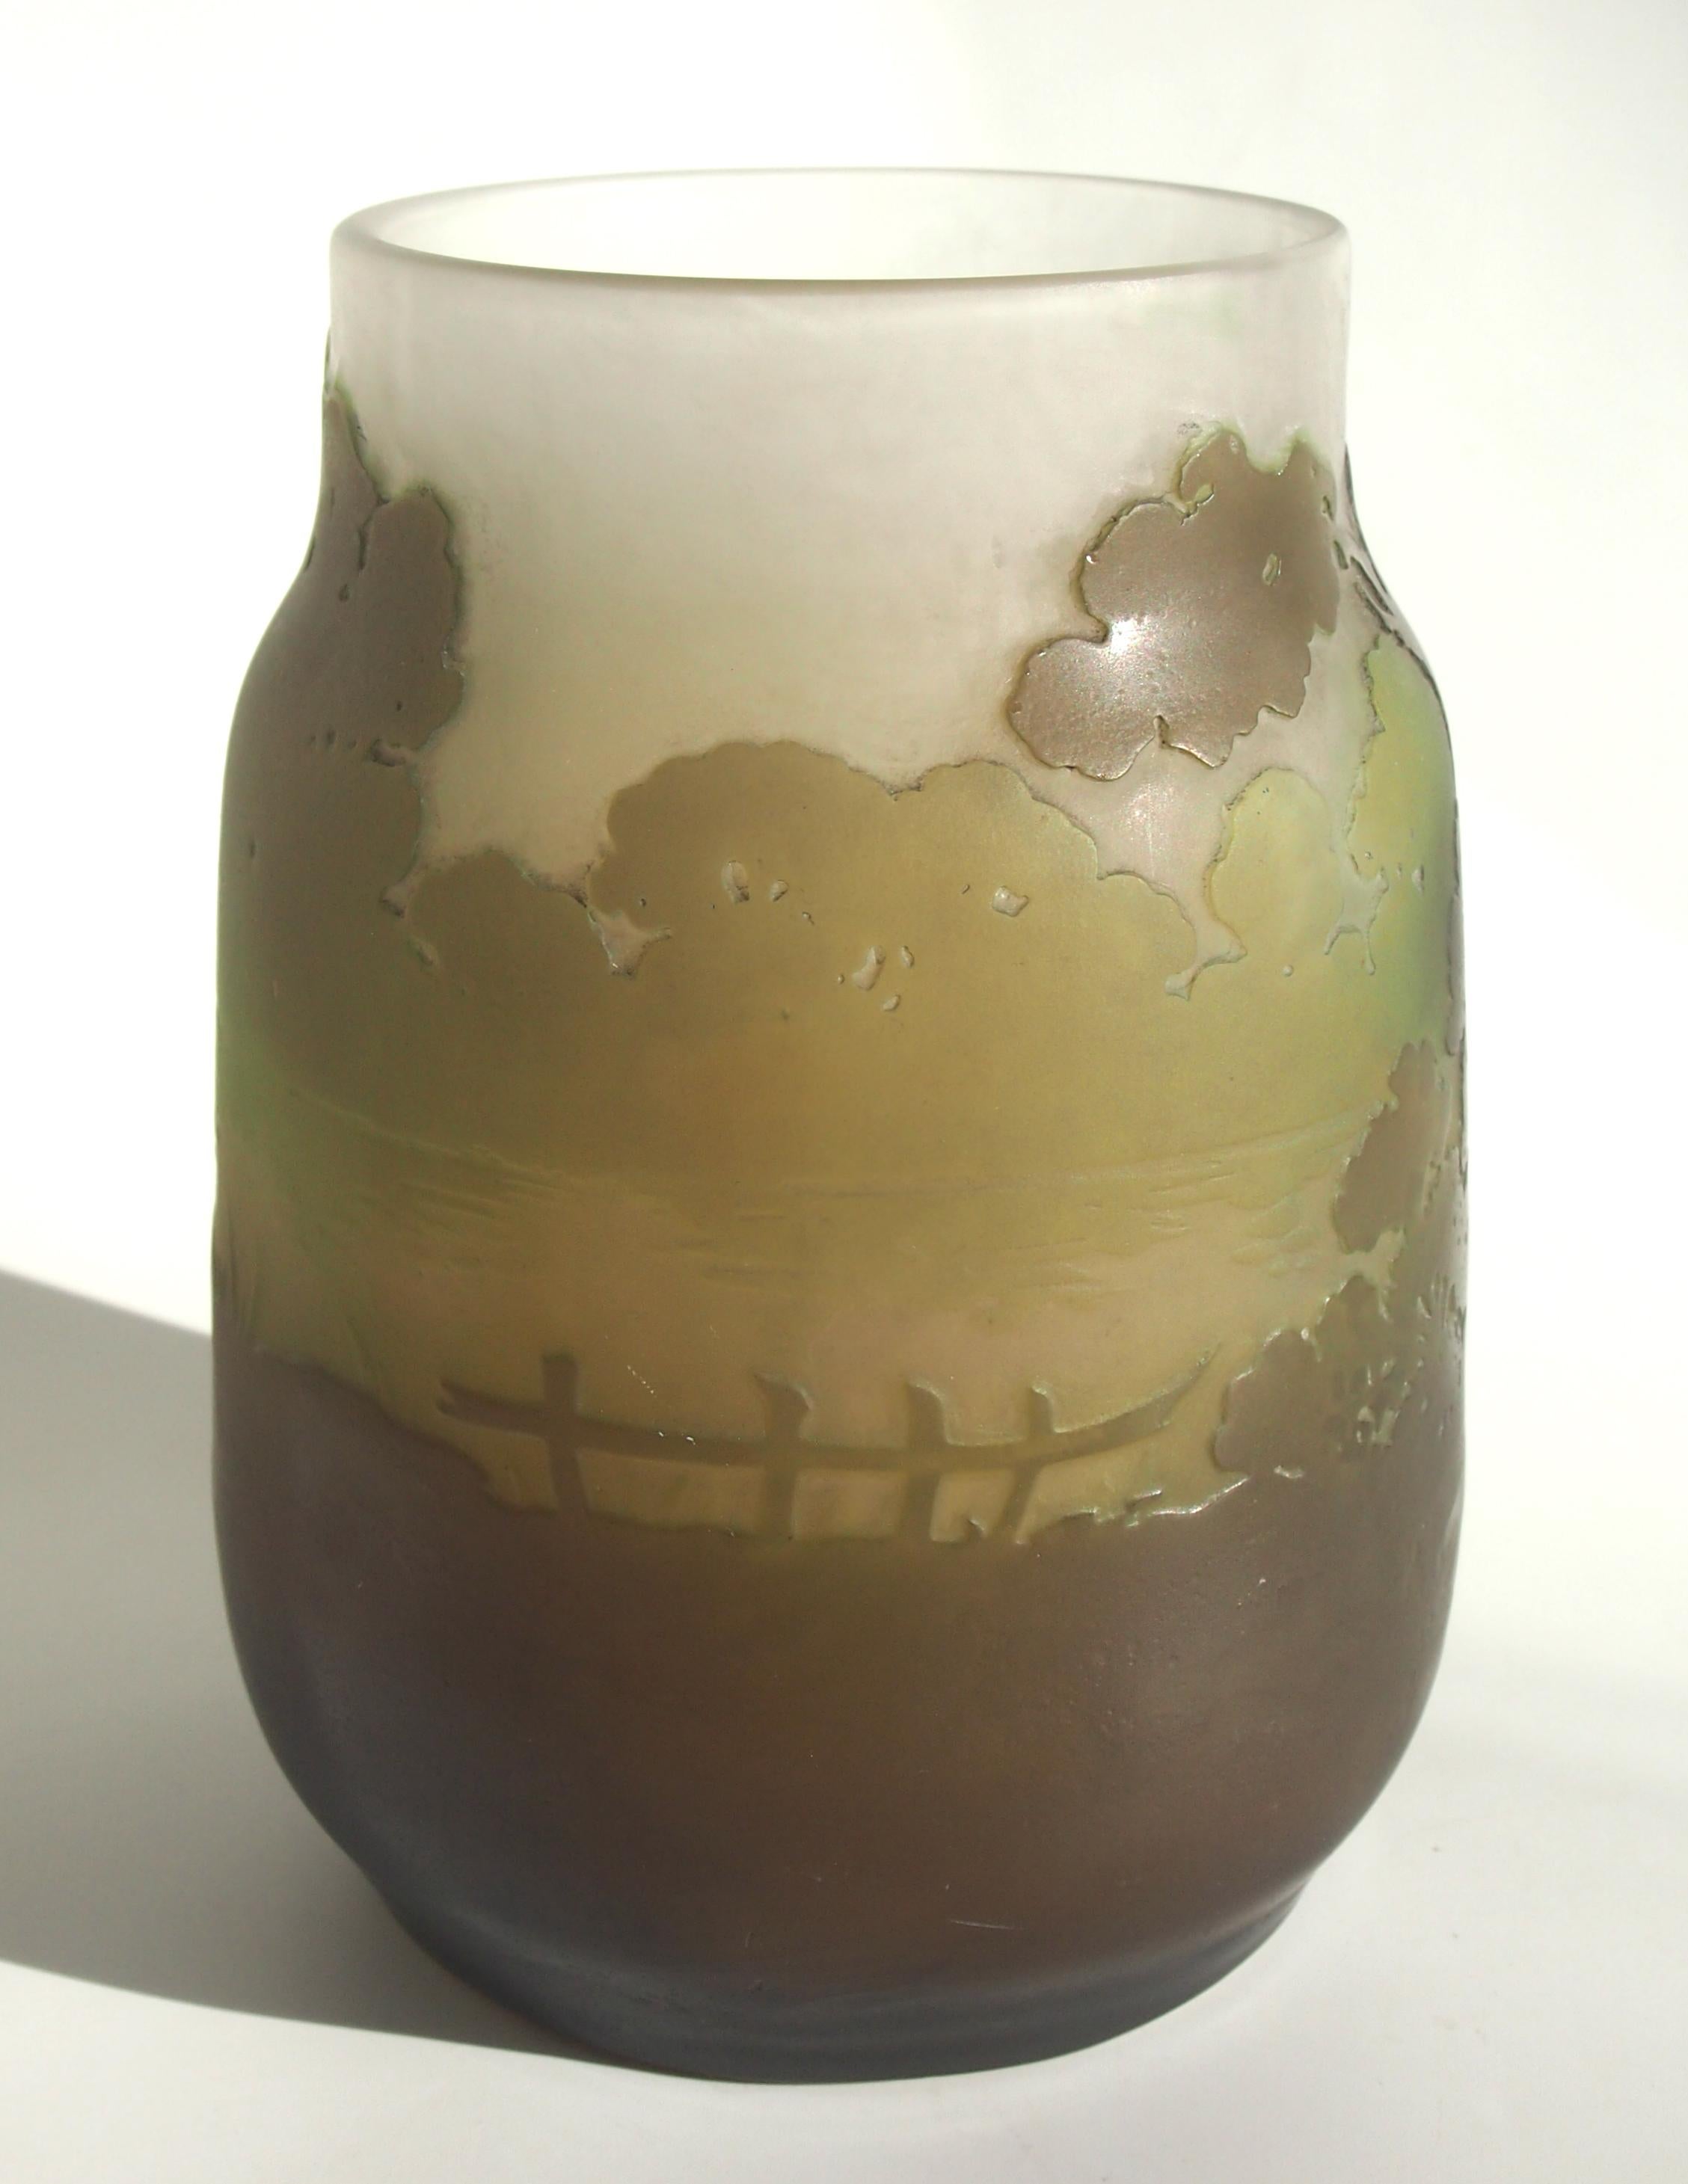 Early 20th Century French Art Nouveau Emile Galle Cameo Glass 'Morning Mist' Landscape Vase c1900 For Sale